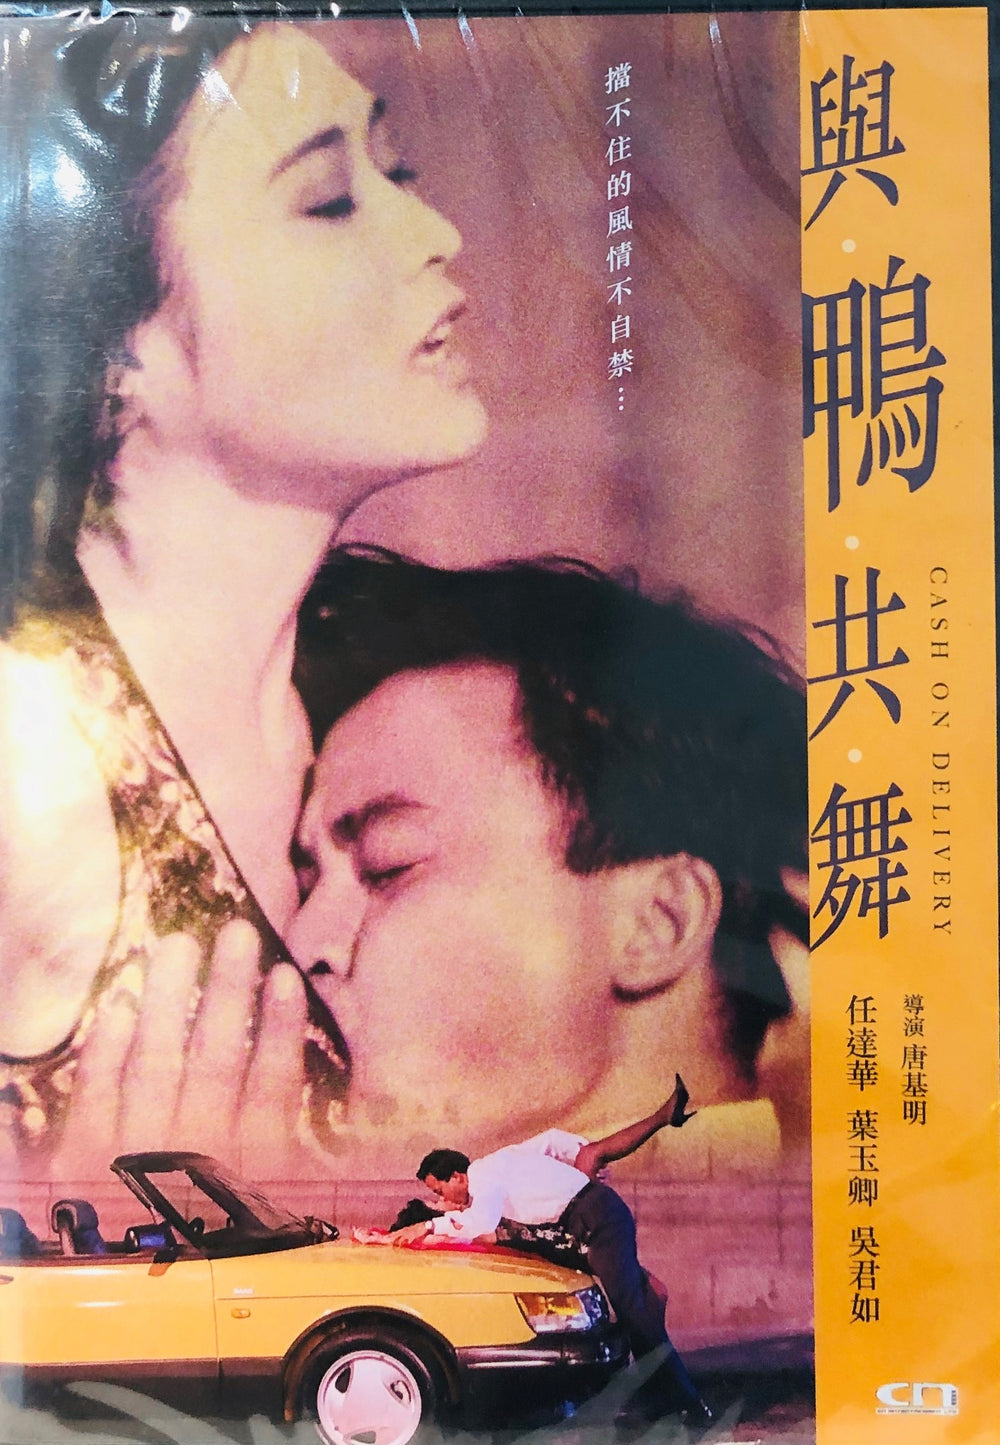 Cash on Delivery 1992 (Hong Kong Movie) DVD with English Subtitles  (Region Free) 與鴨共舞